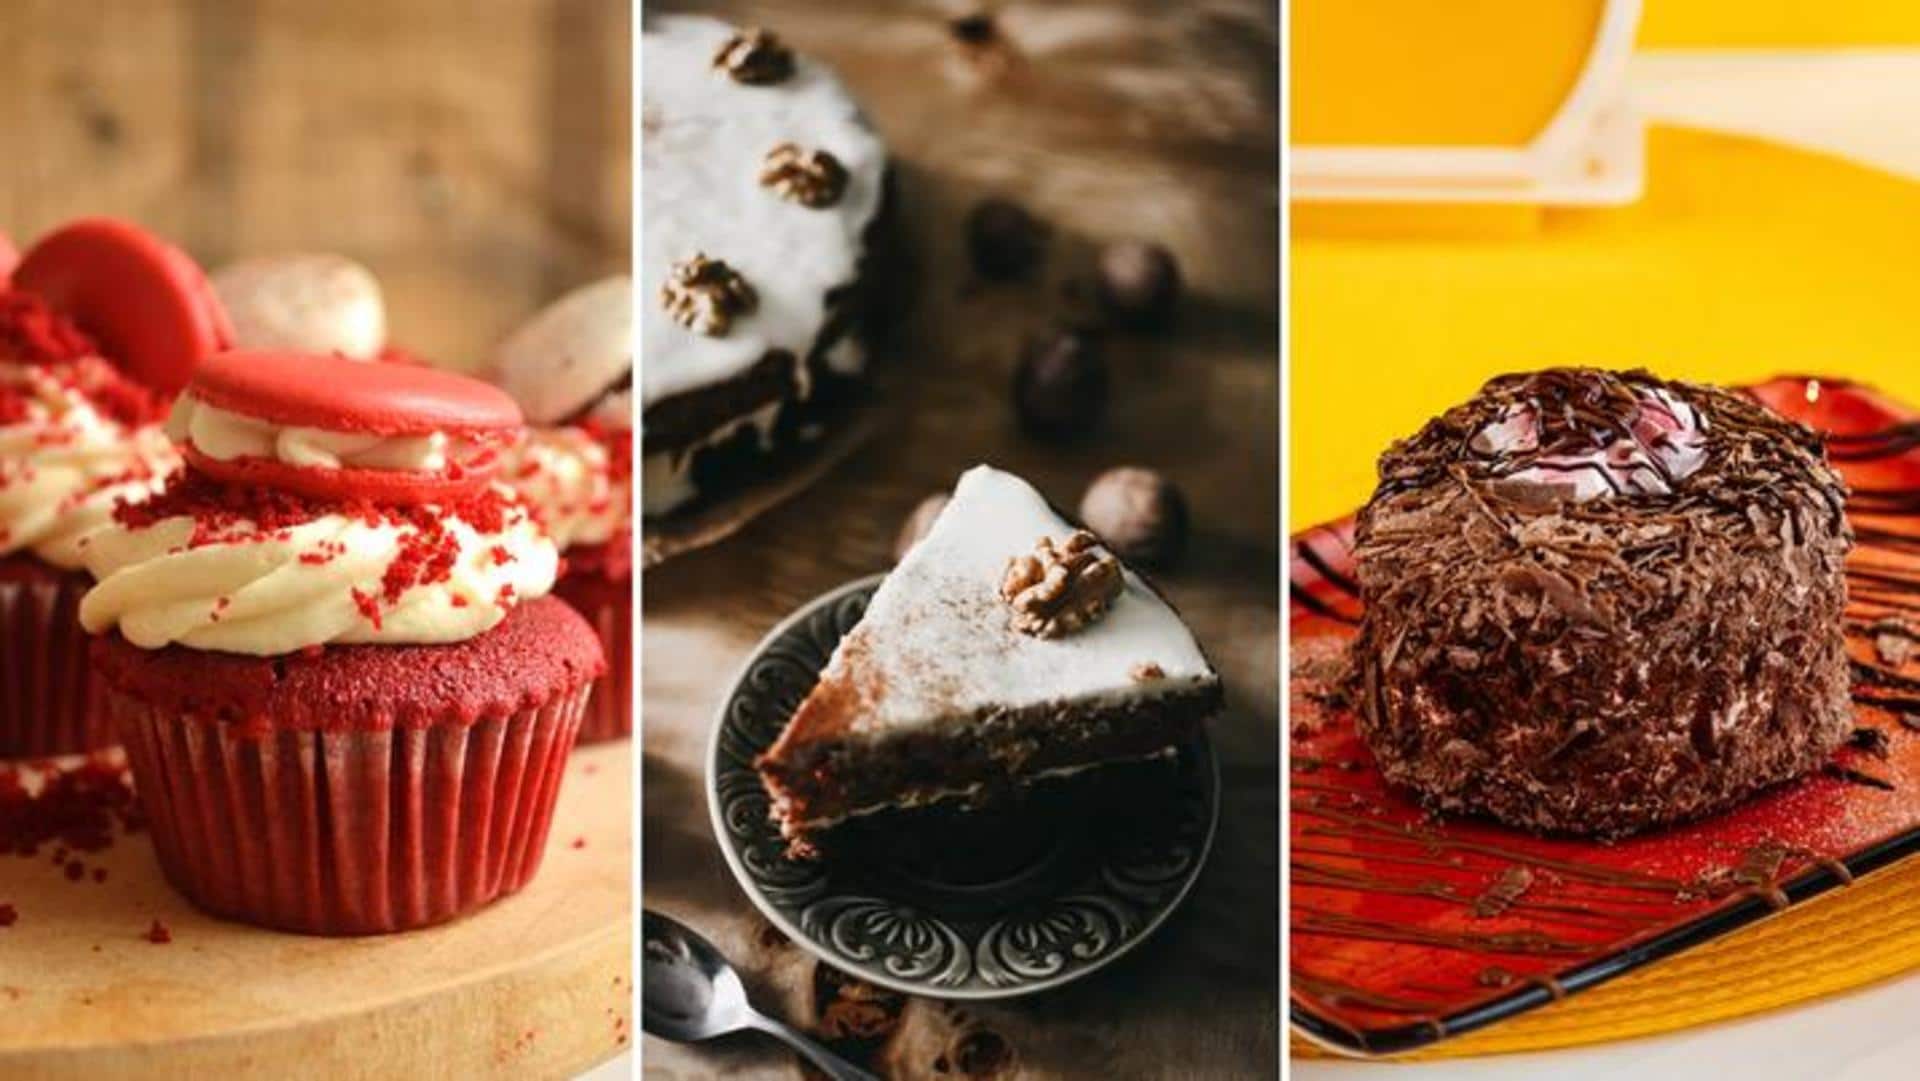 This Valentine's Day, bake these yummy cakes together 